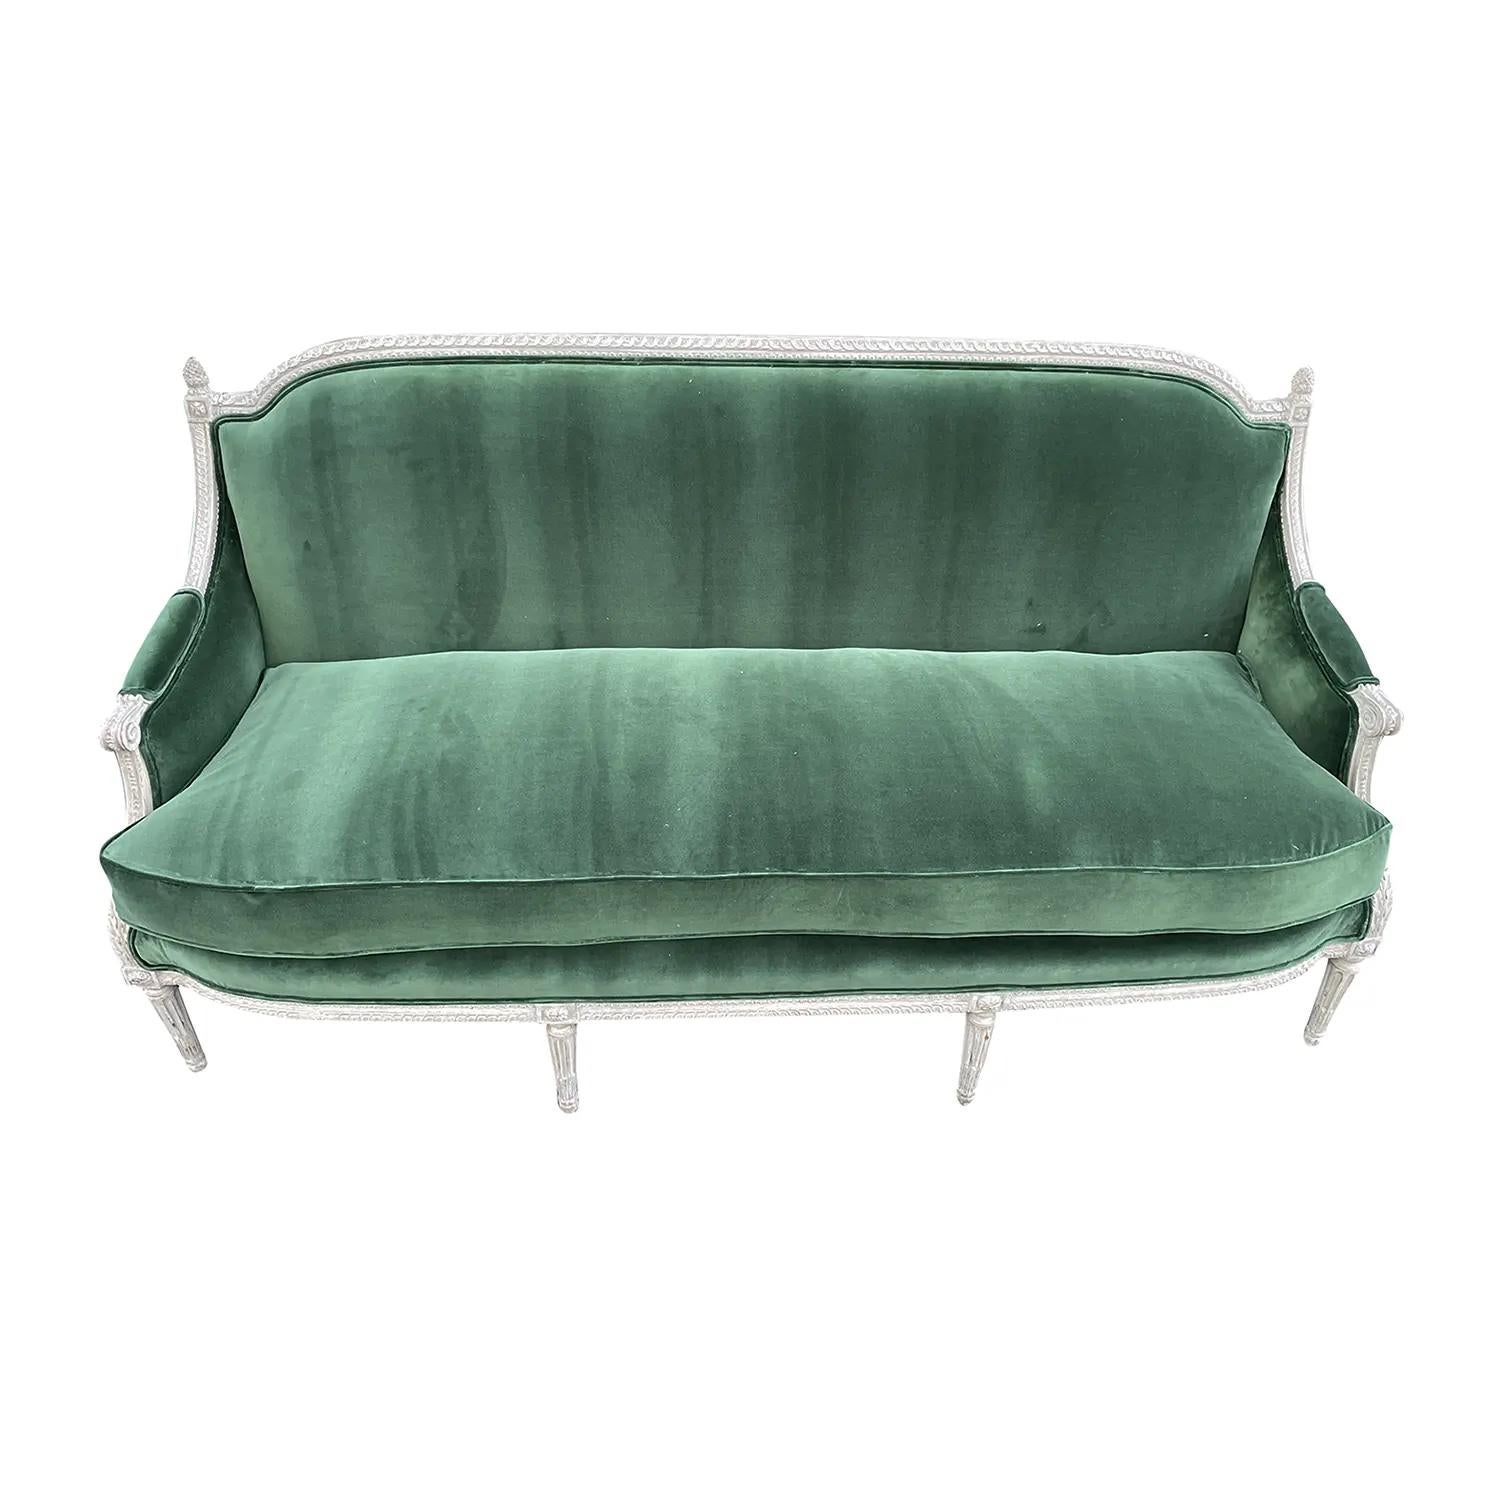 Belle Époque 18th Century Green French Three Seater Beechwood, Velour Sofa by Sulpice Brizard For Sale